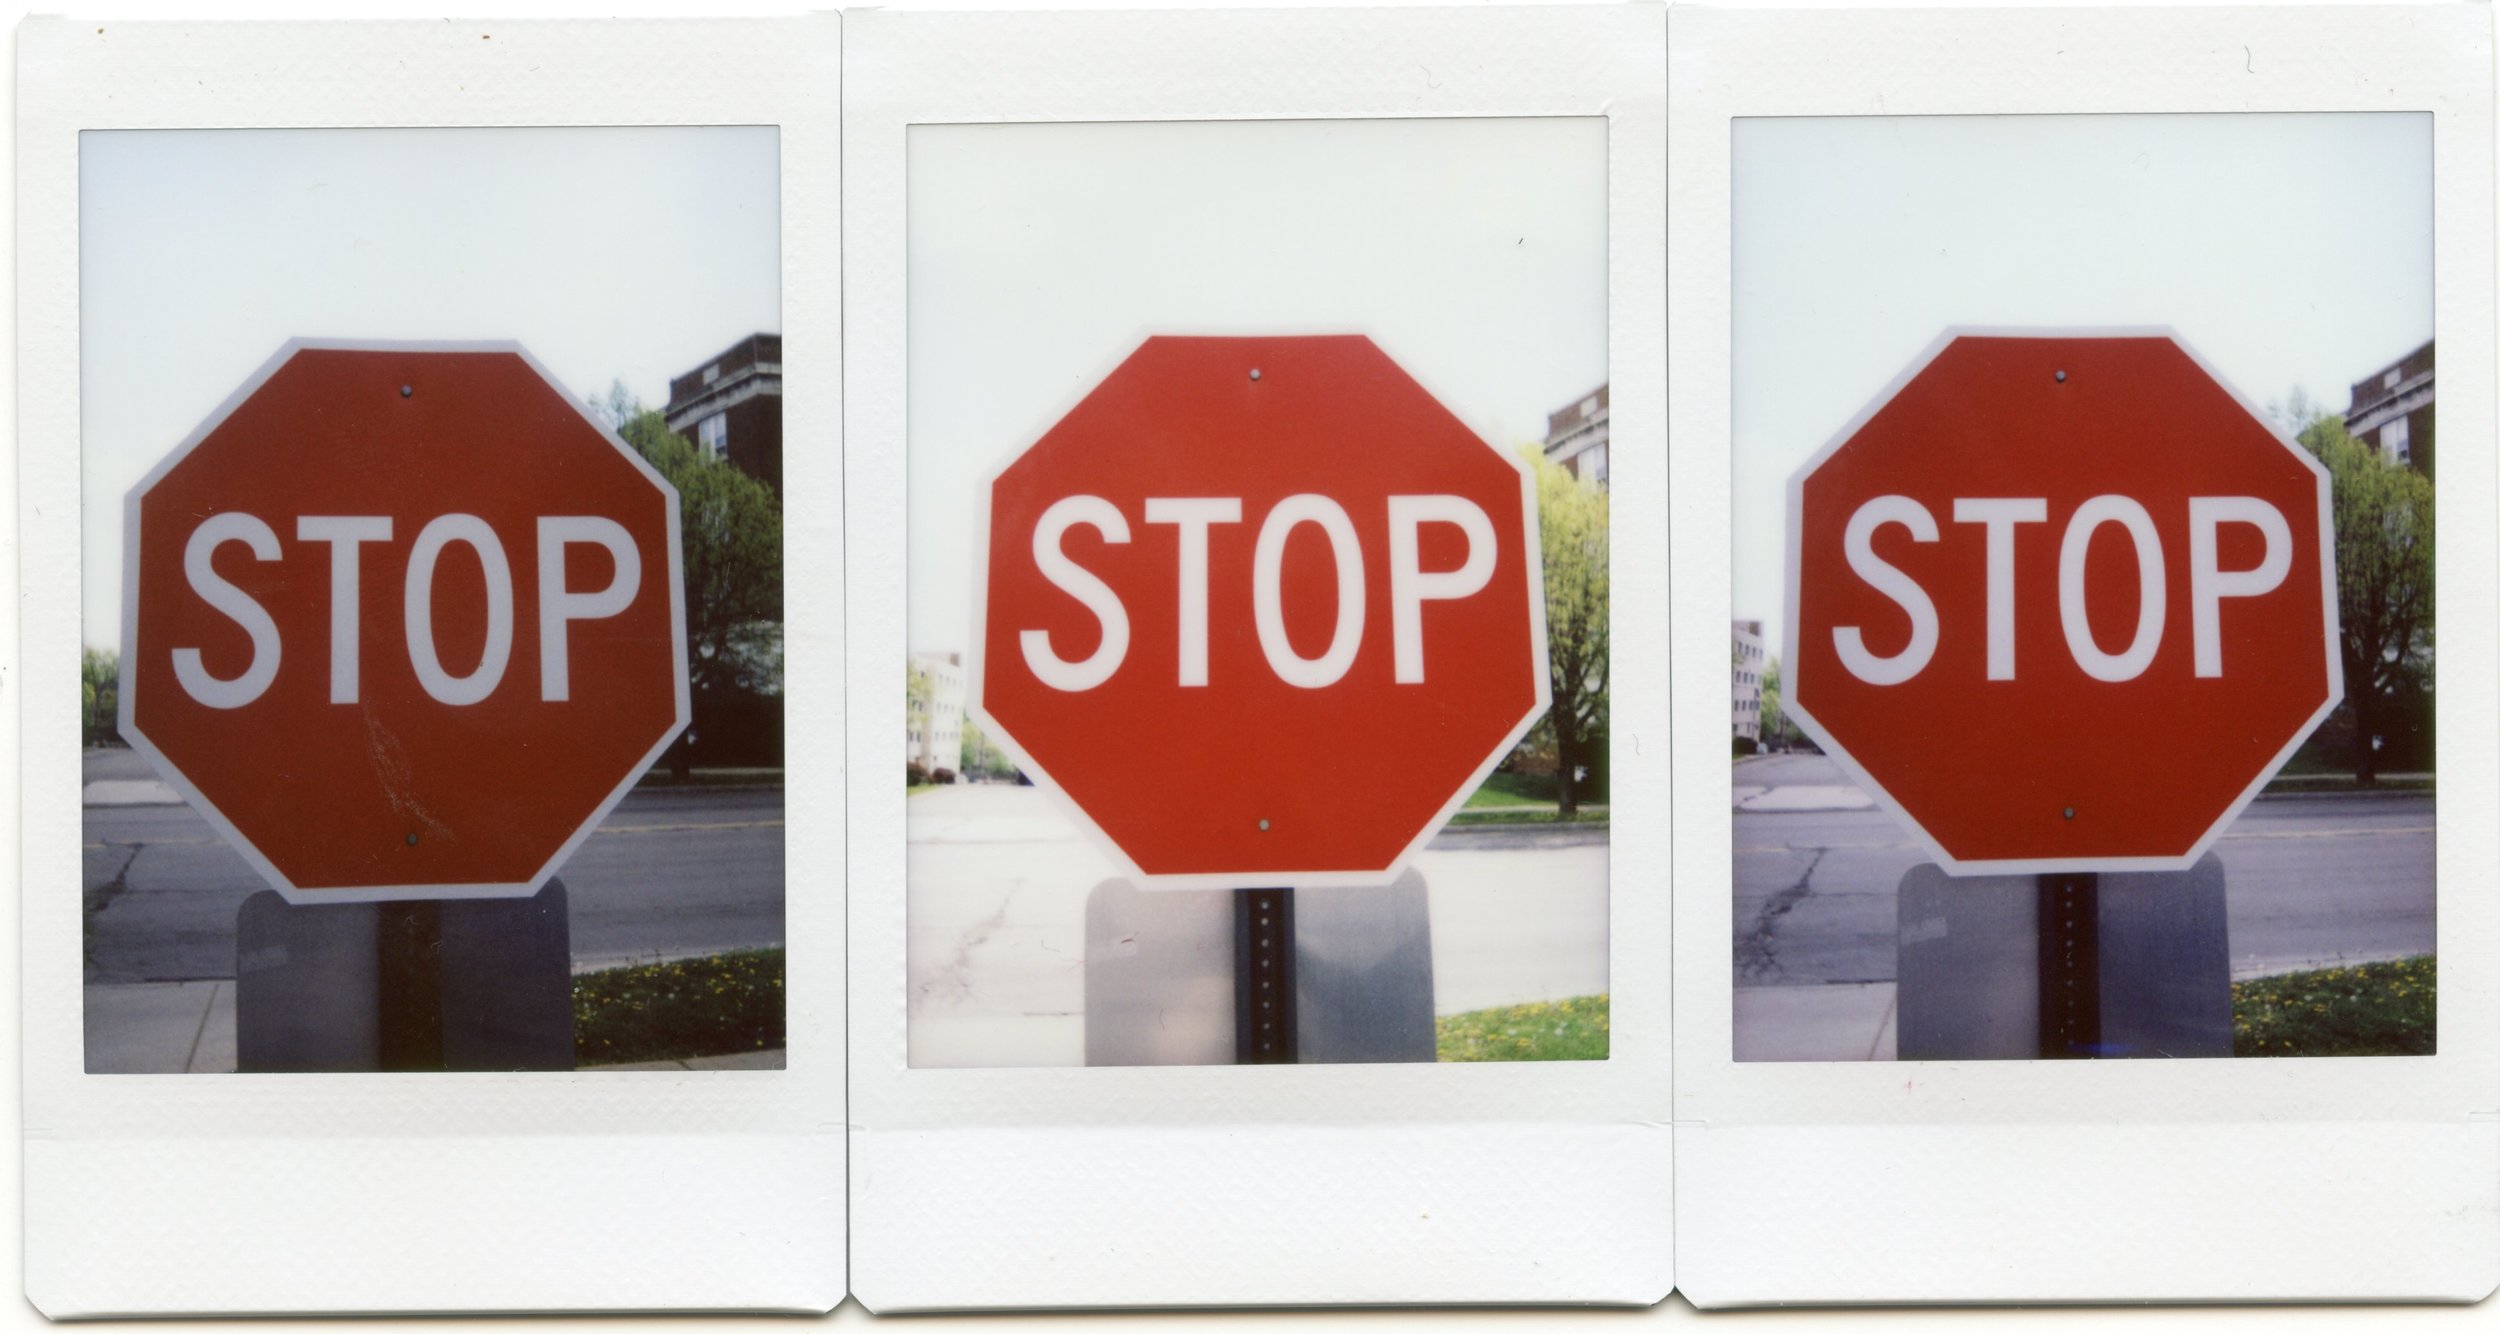 Examples of pictures taken by Fuji Instax Mini 50S (left), Mini 70 (center) and Mini 90 (right) cameras.